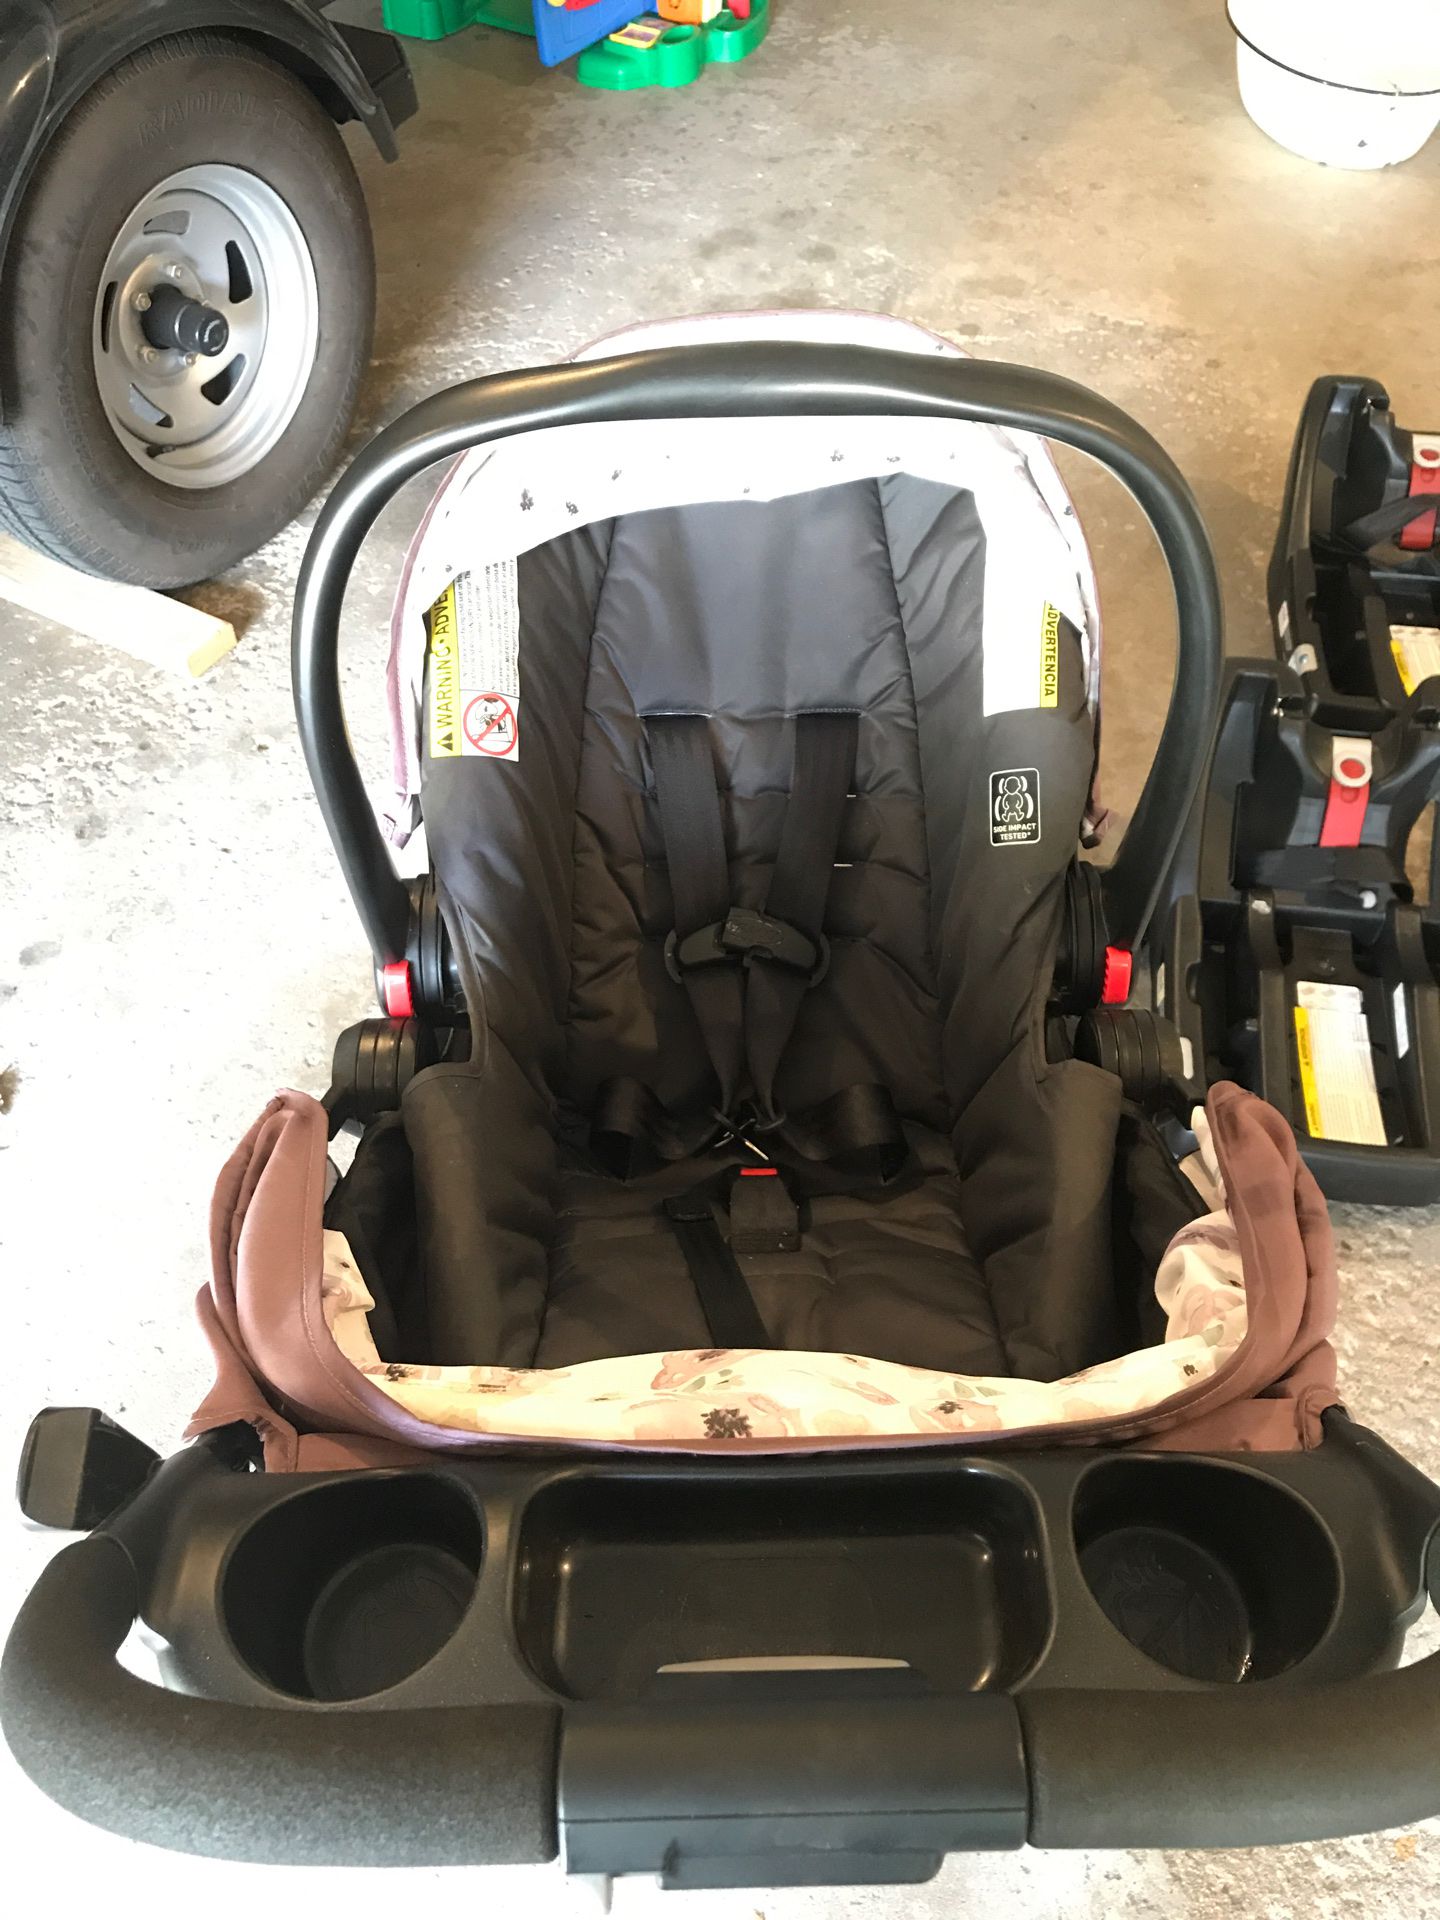 Graco car seat, troller, 3 click connect bases